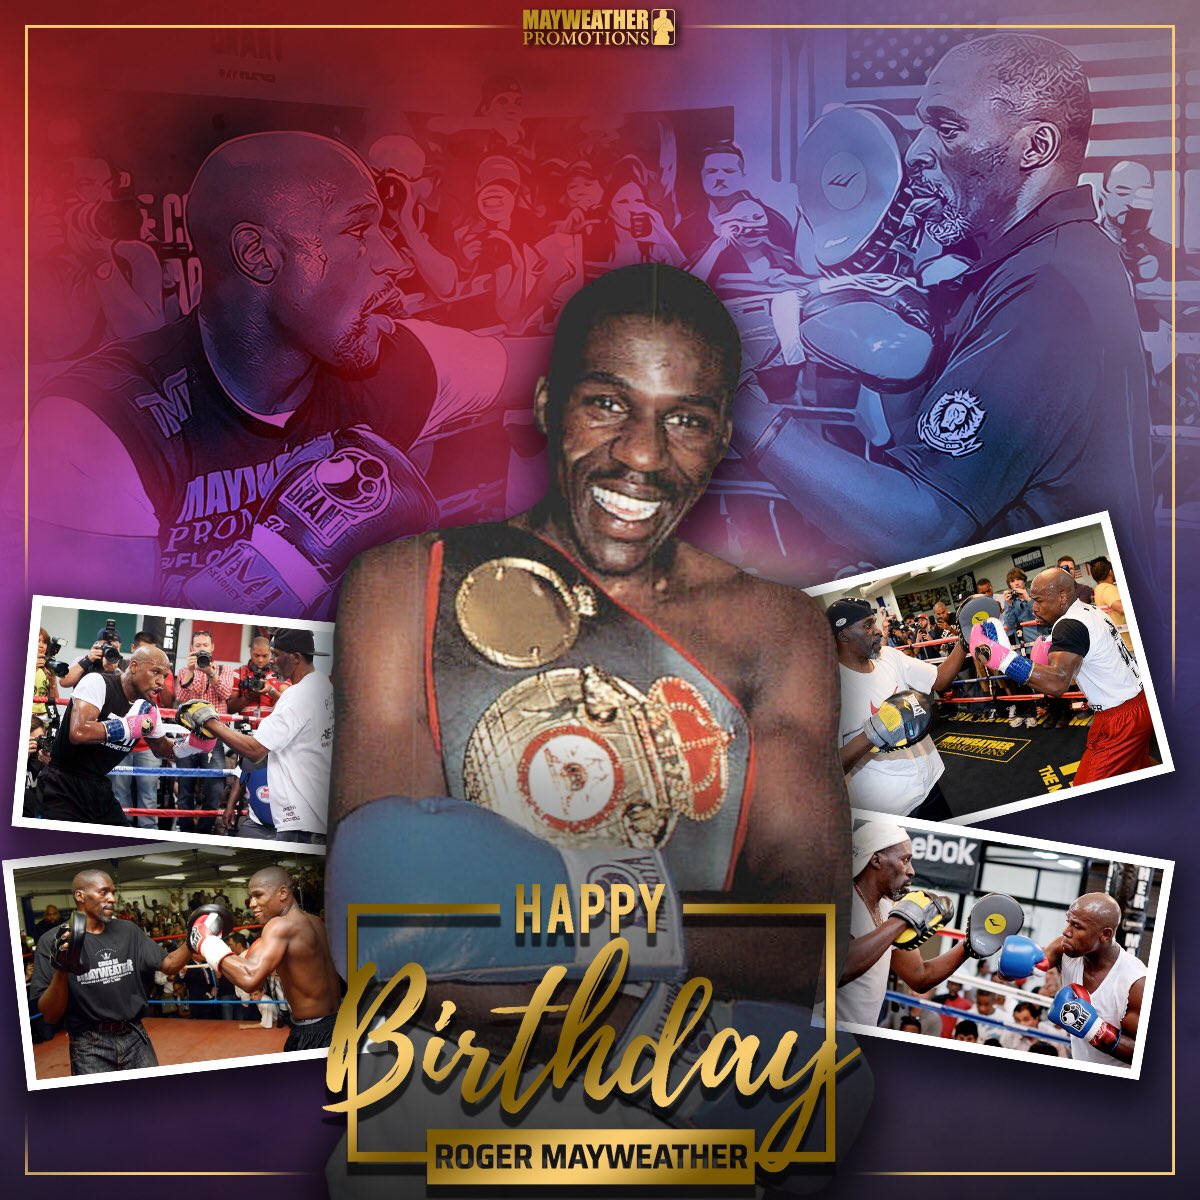 Join us in wishing Uncle Roger Mayweather a very special happy birthday!  